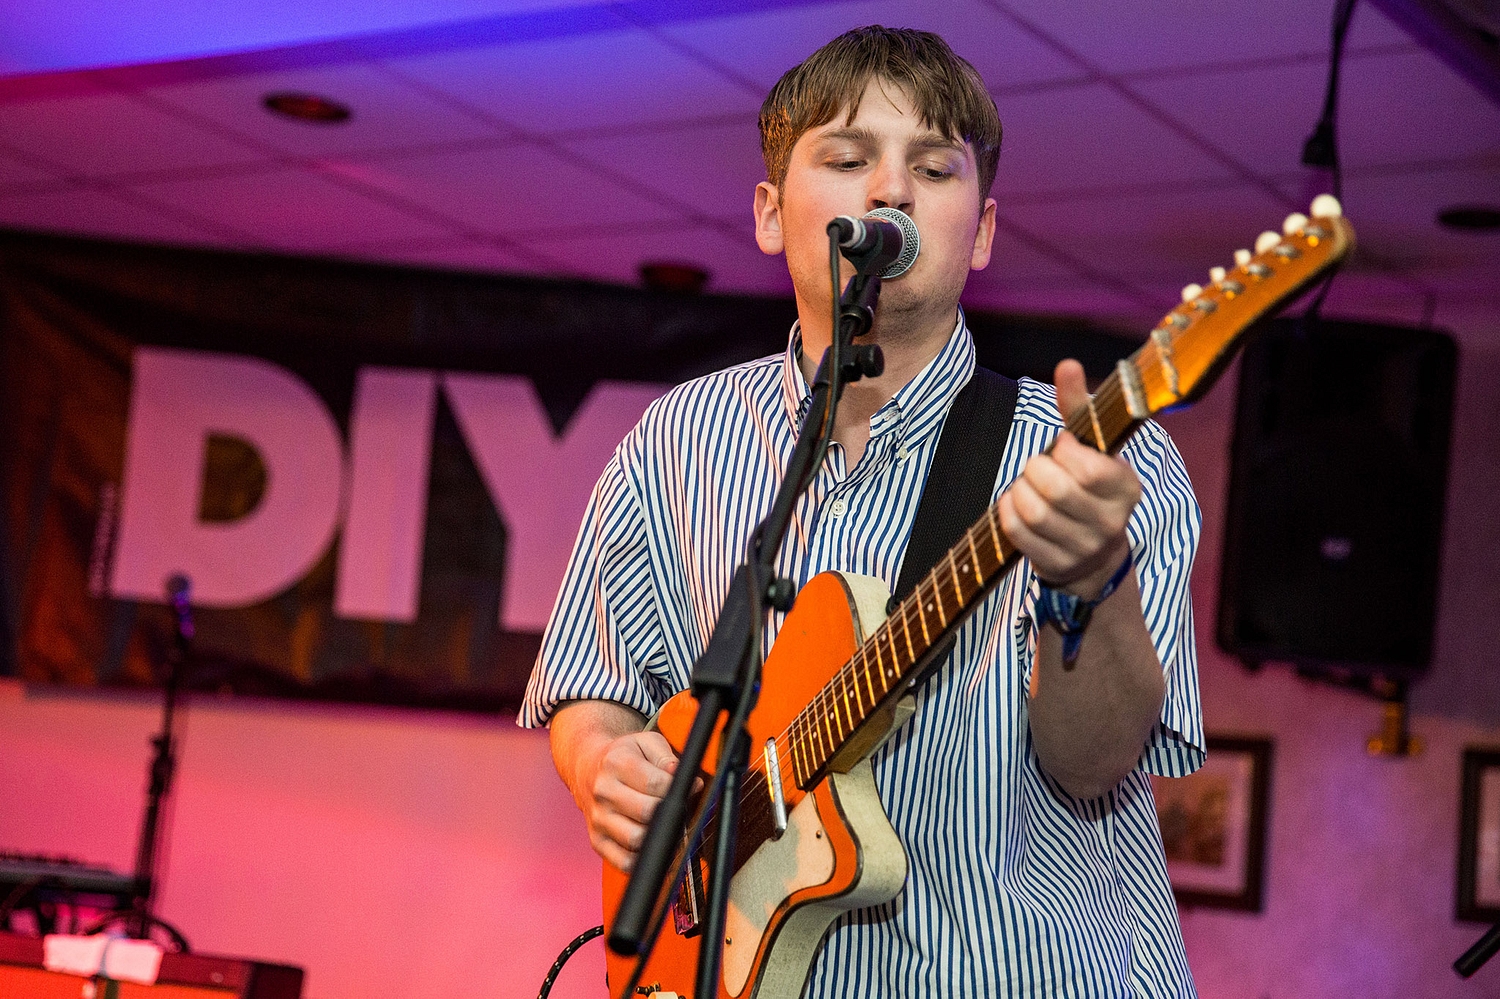 Trudy bring shuffling feet and soppy serenades to DIY’s Great Escape stage